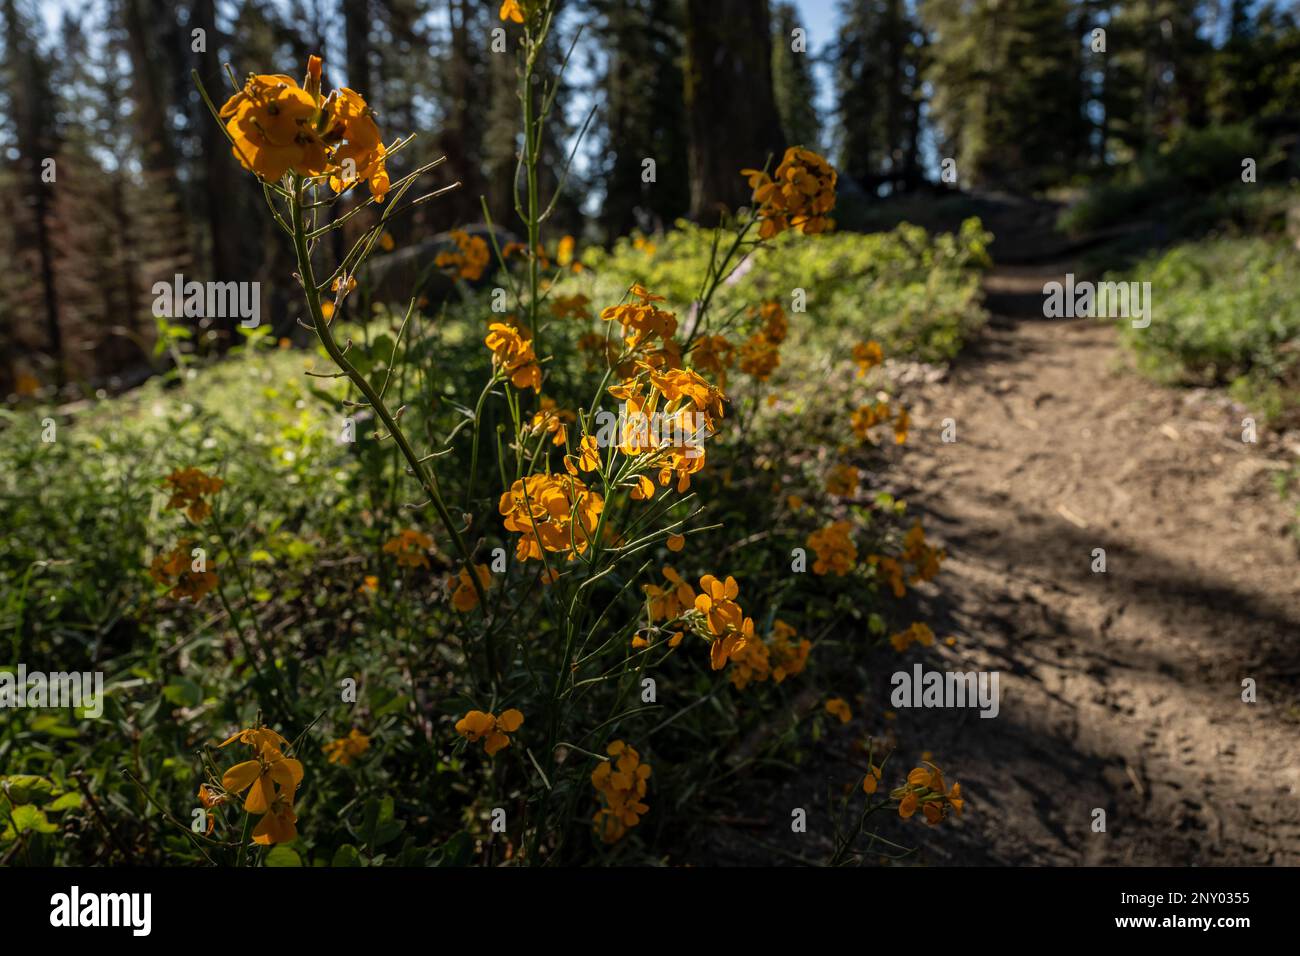 Western Wall Flower Full of Blooms Along Trail in Kings Canyon National Park Stock Photo